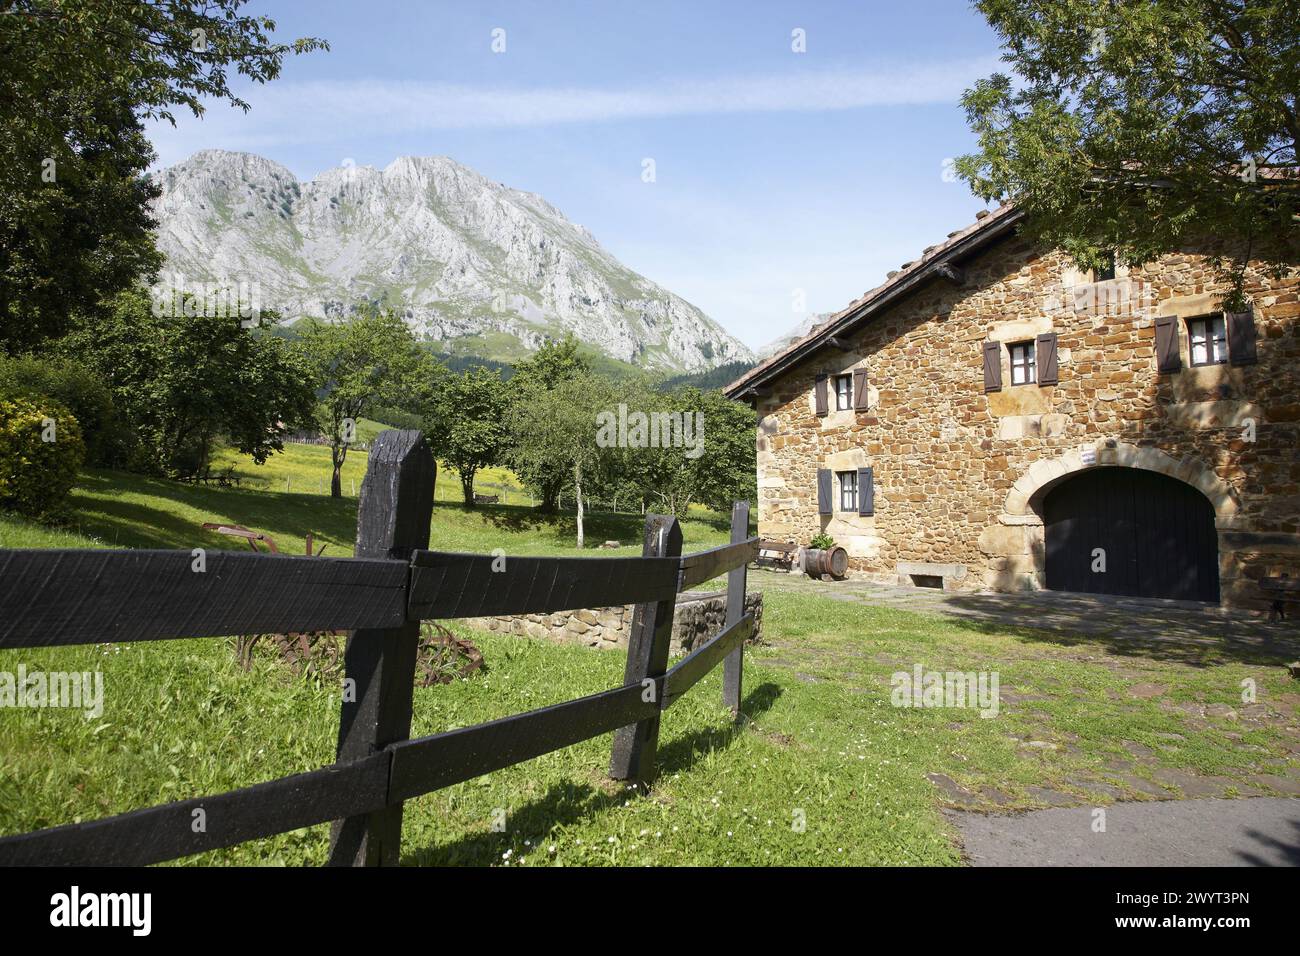 Mount Amboto and rural house, Axpe, Valley of Atxondo, Biscay, Basque Country, Spain. Stock Photo